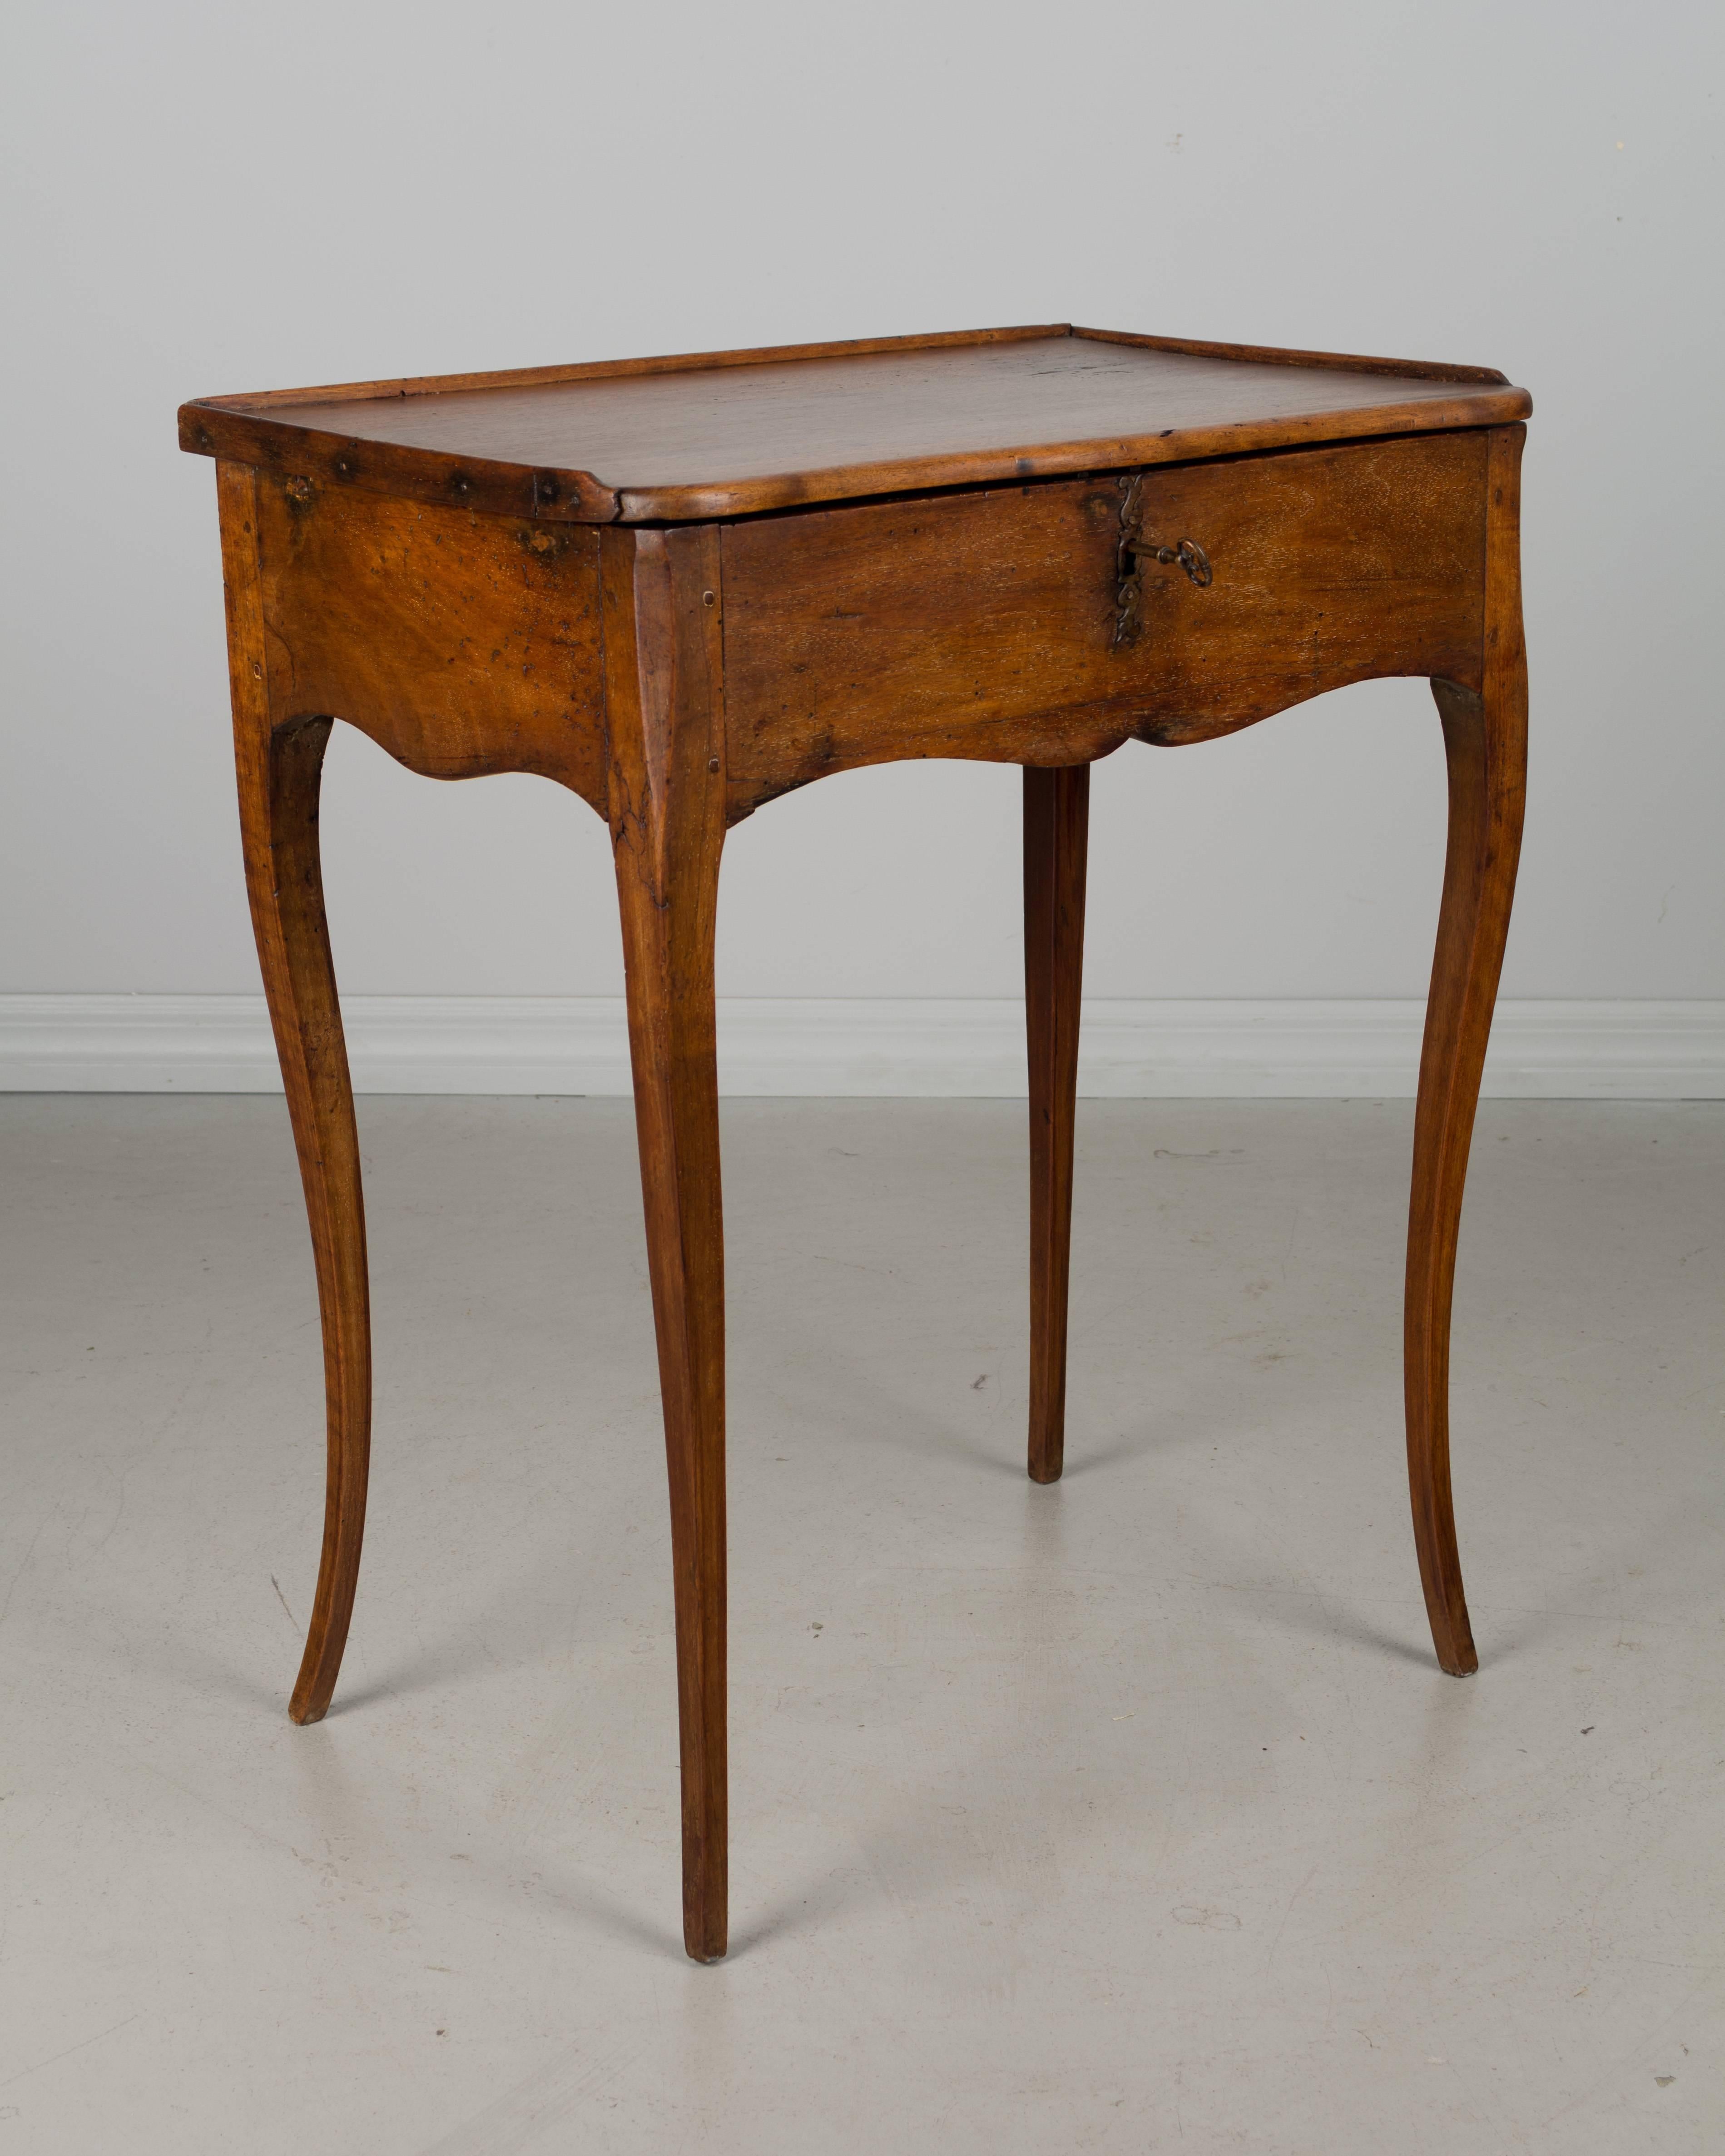 An early 19th century Louis XV style Country French side table, or work table made of solid walnut and cherry. Top hinges open to reveal divided compartments. Working lock and key. Nice proportions with slender curved legs. Restoration on back